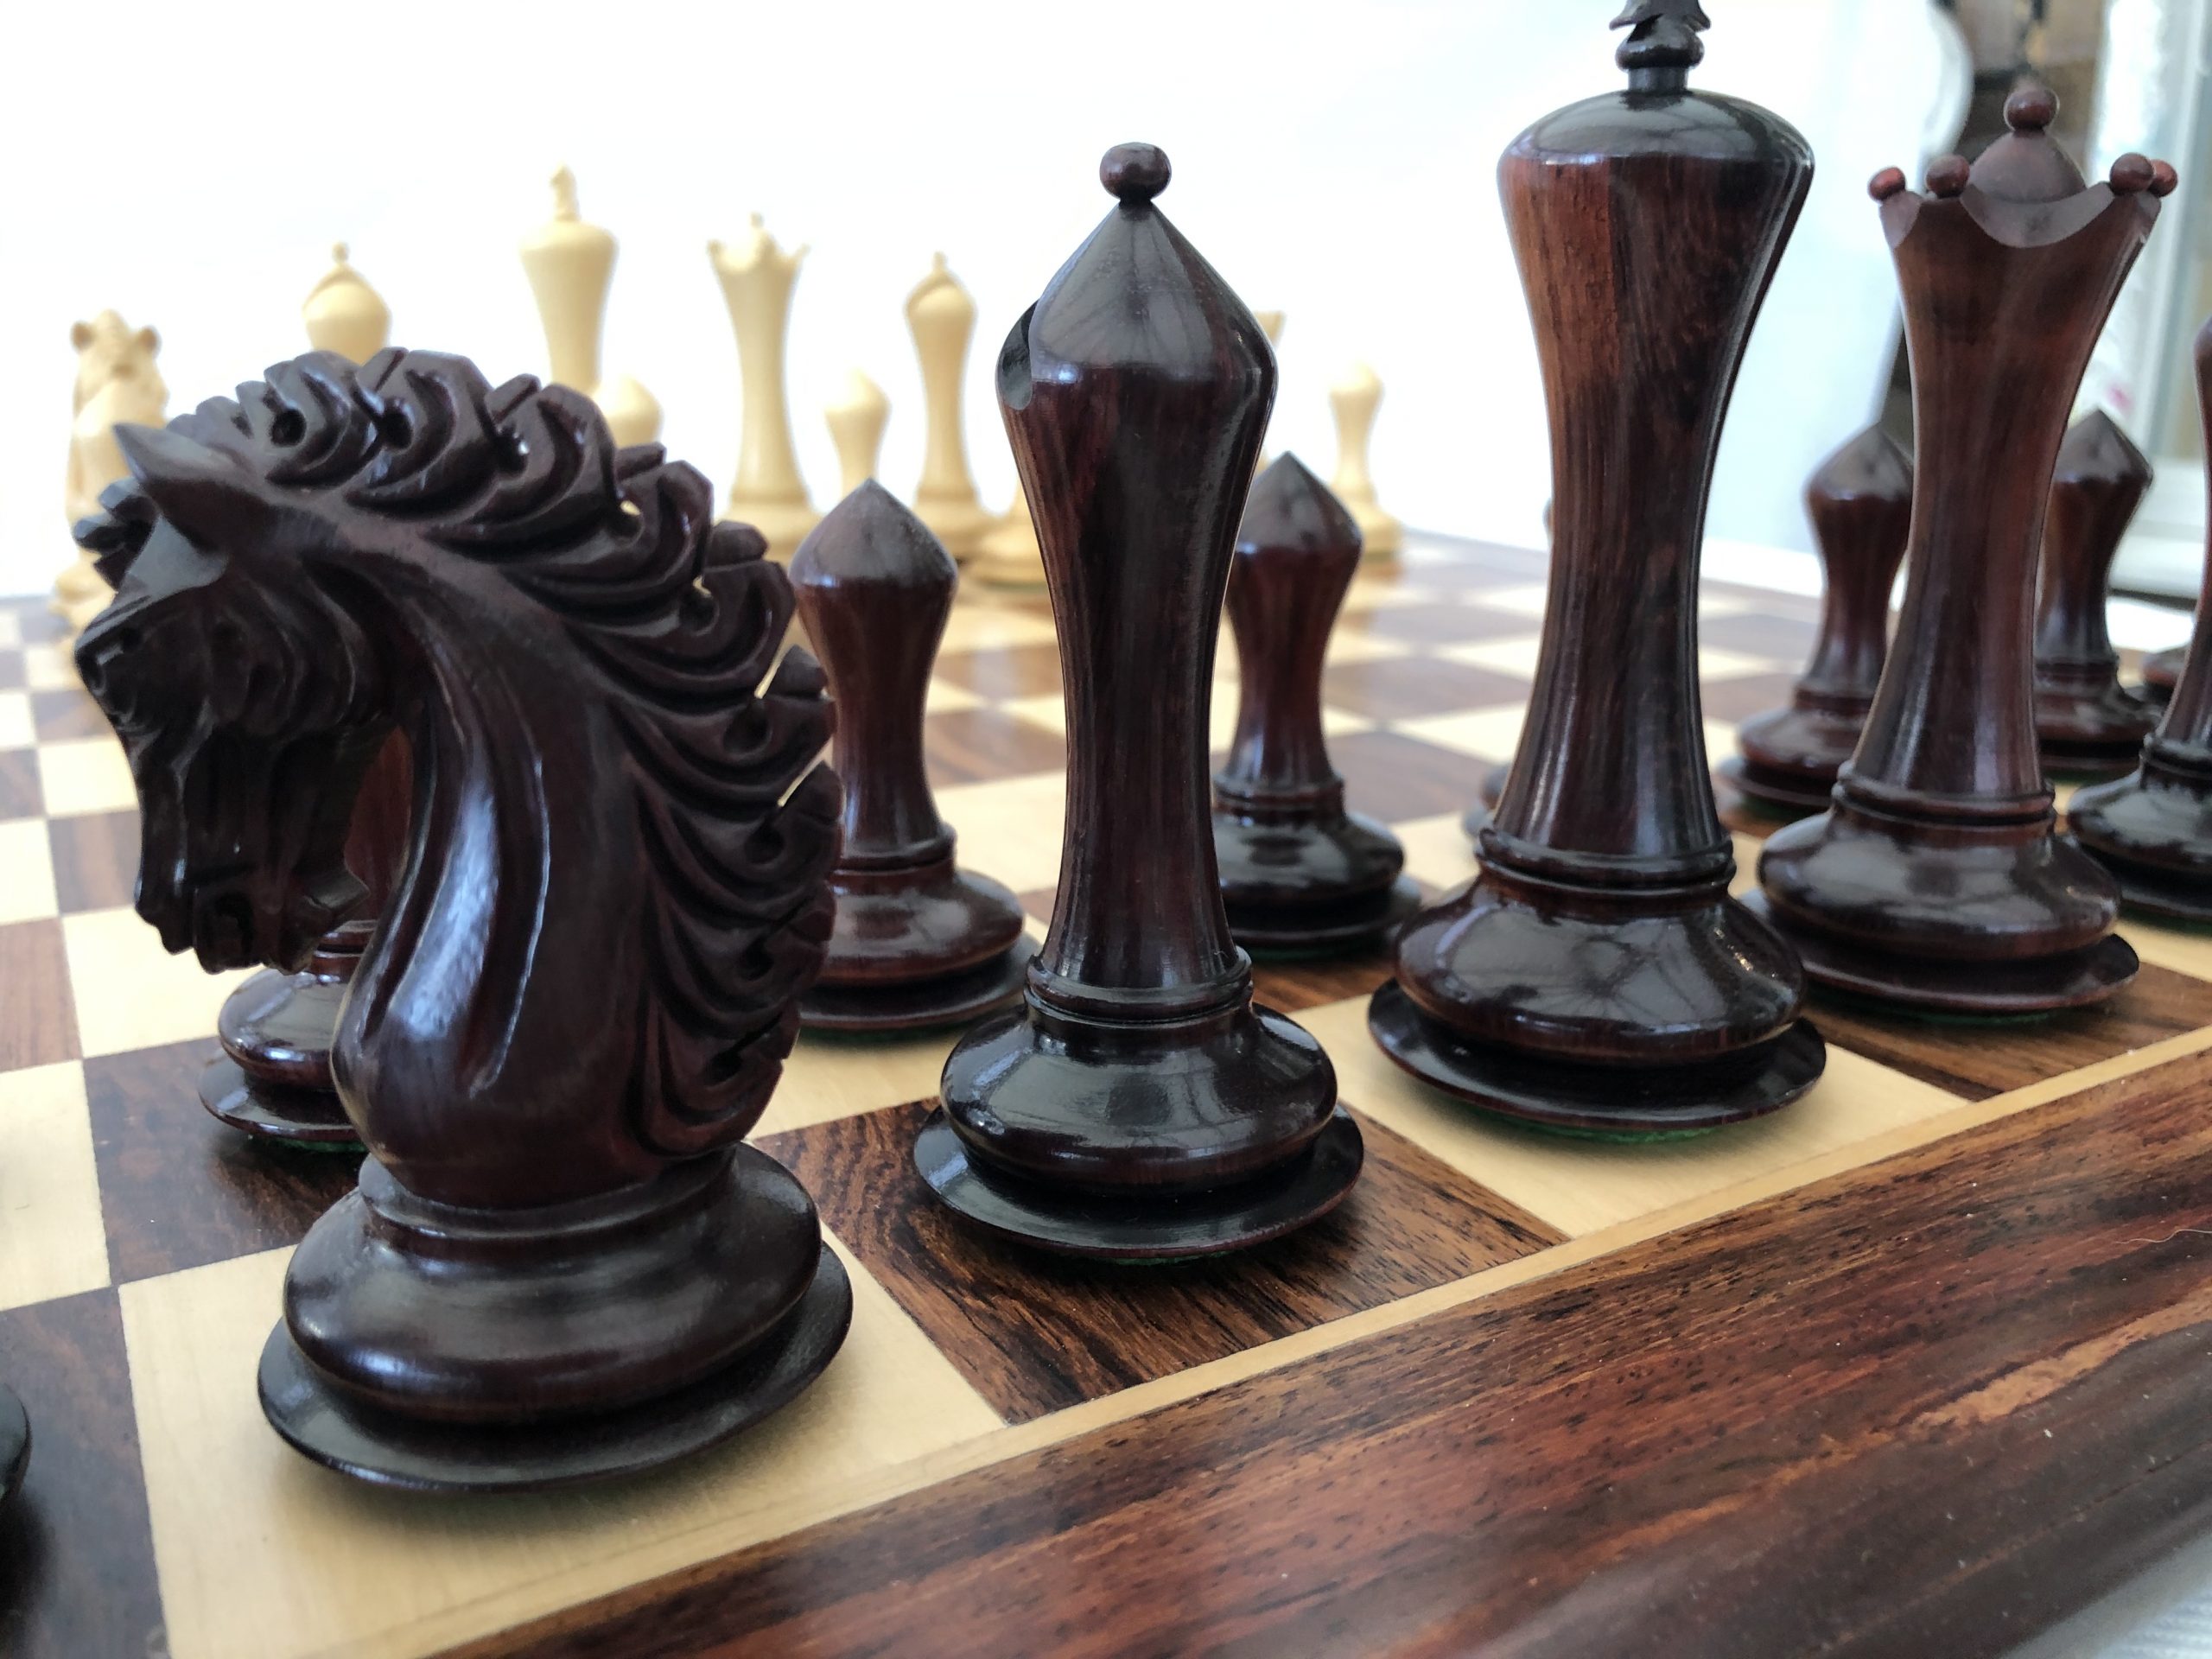 Ebony Chess Board with Rosewood Border - 2in Squares